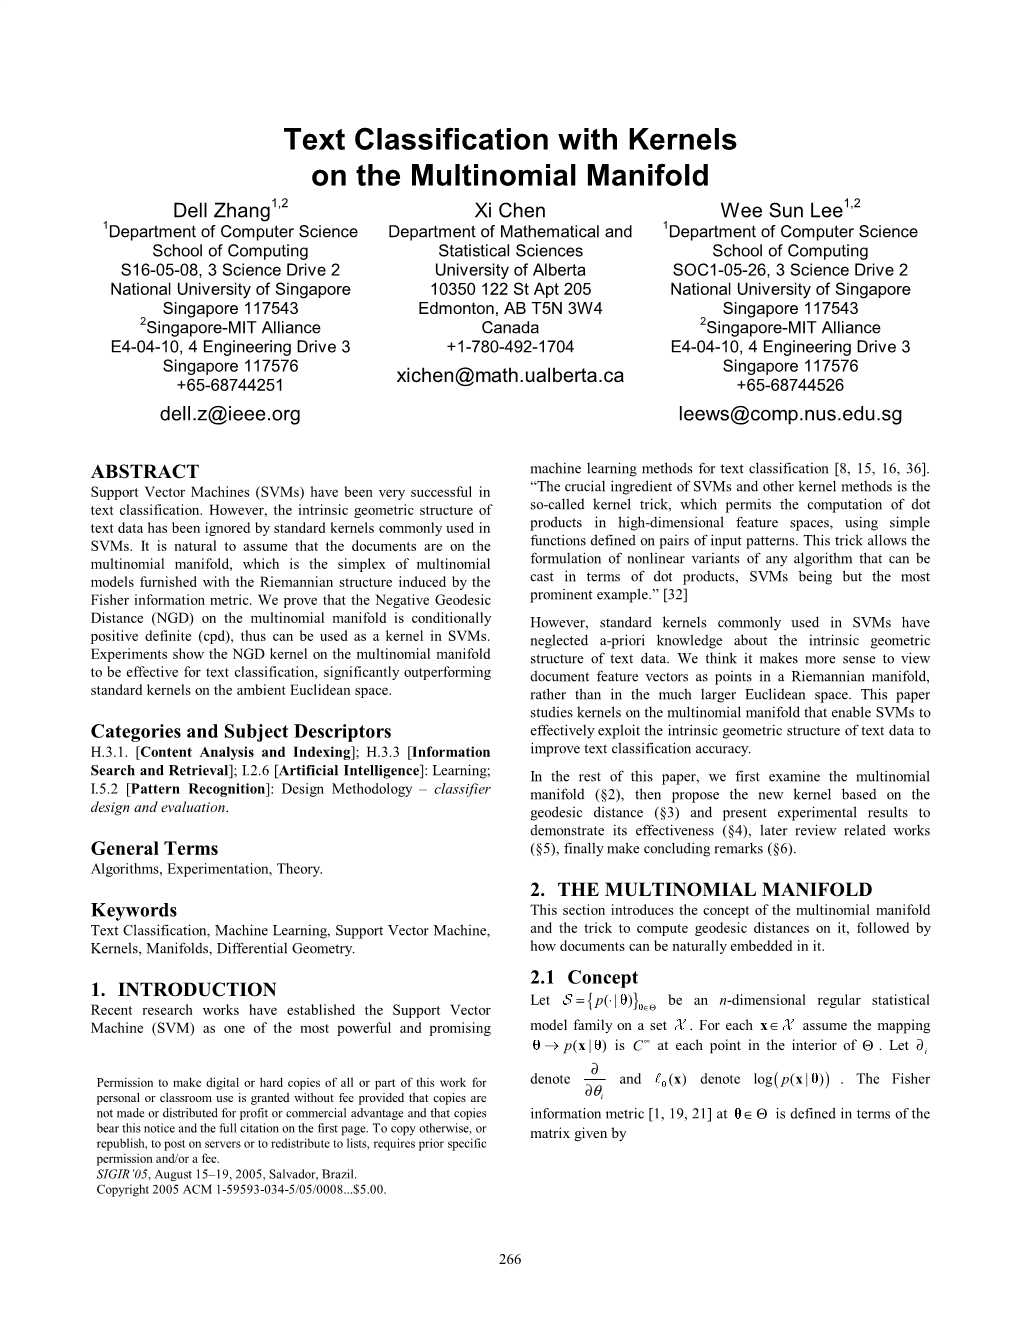 Text Classification with Kernels on the Multinomial Manifold